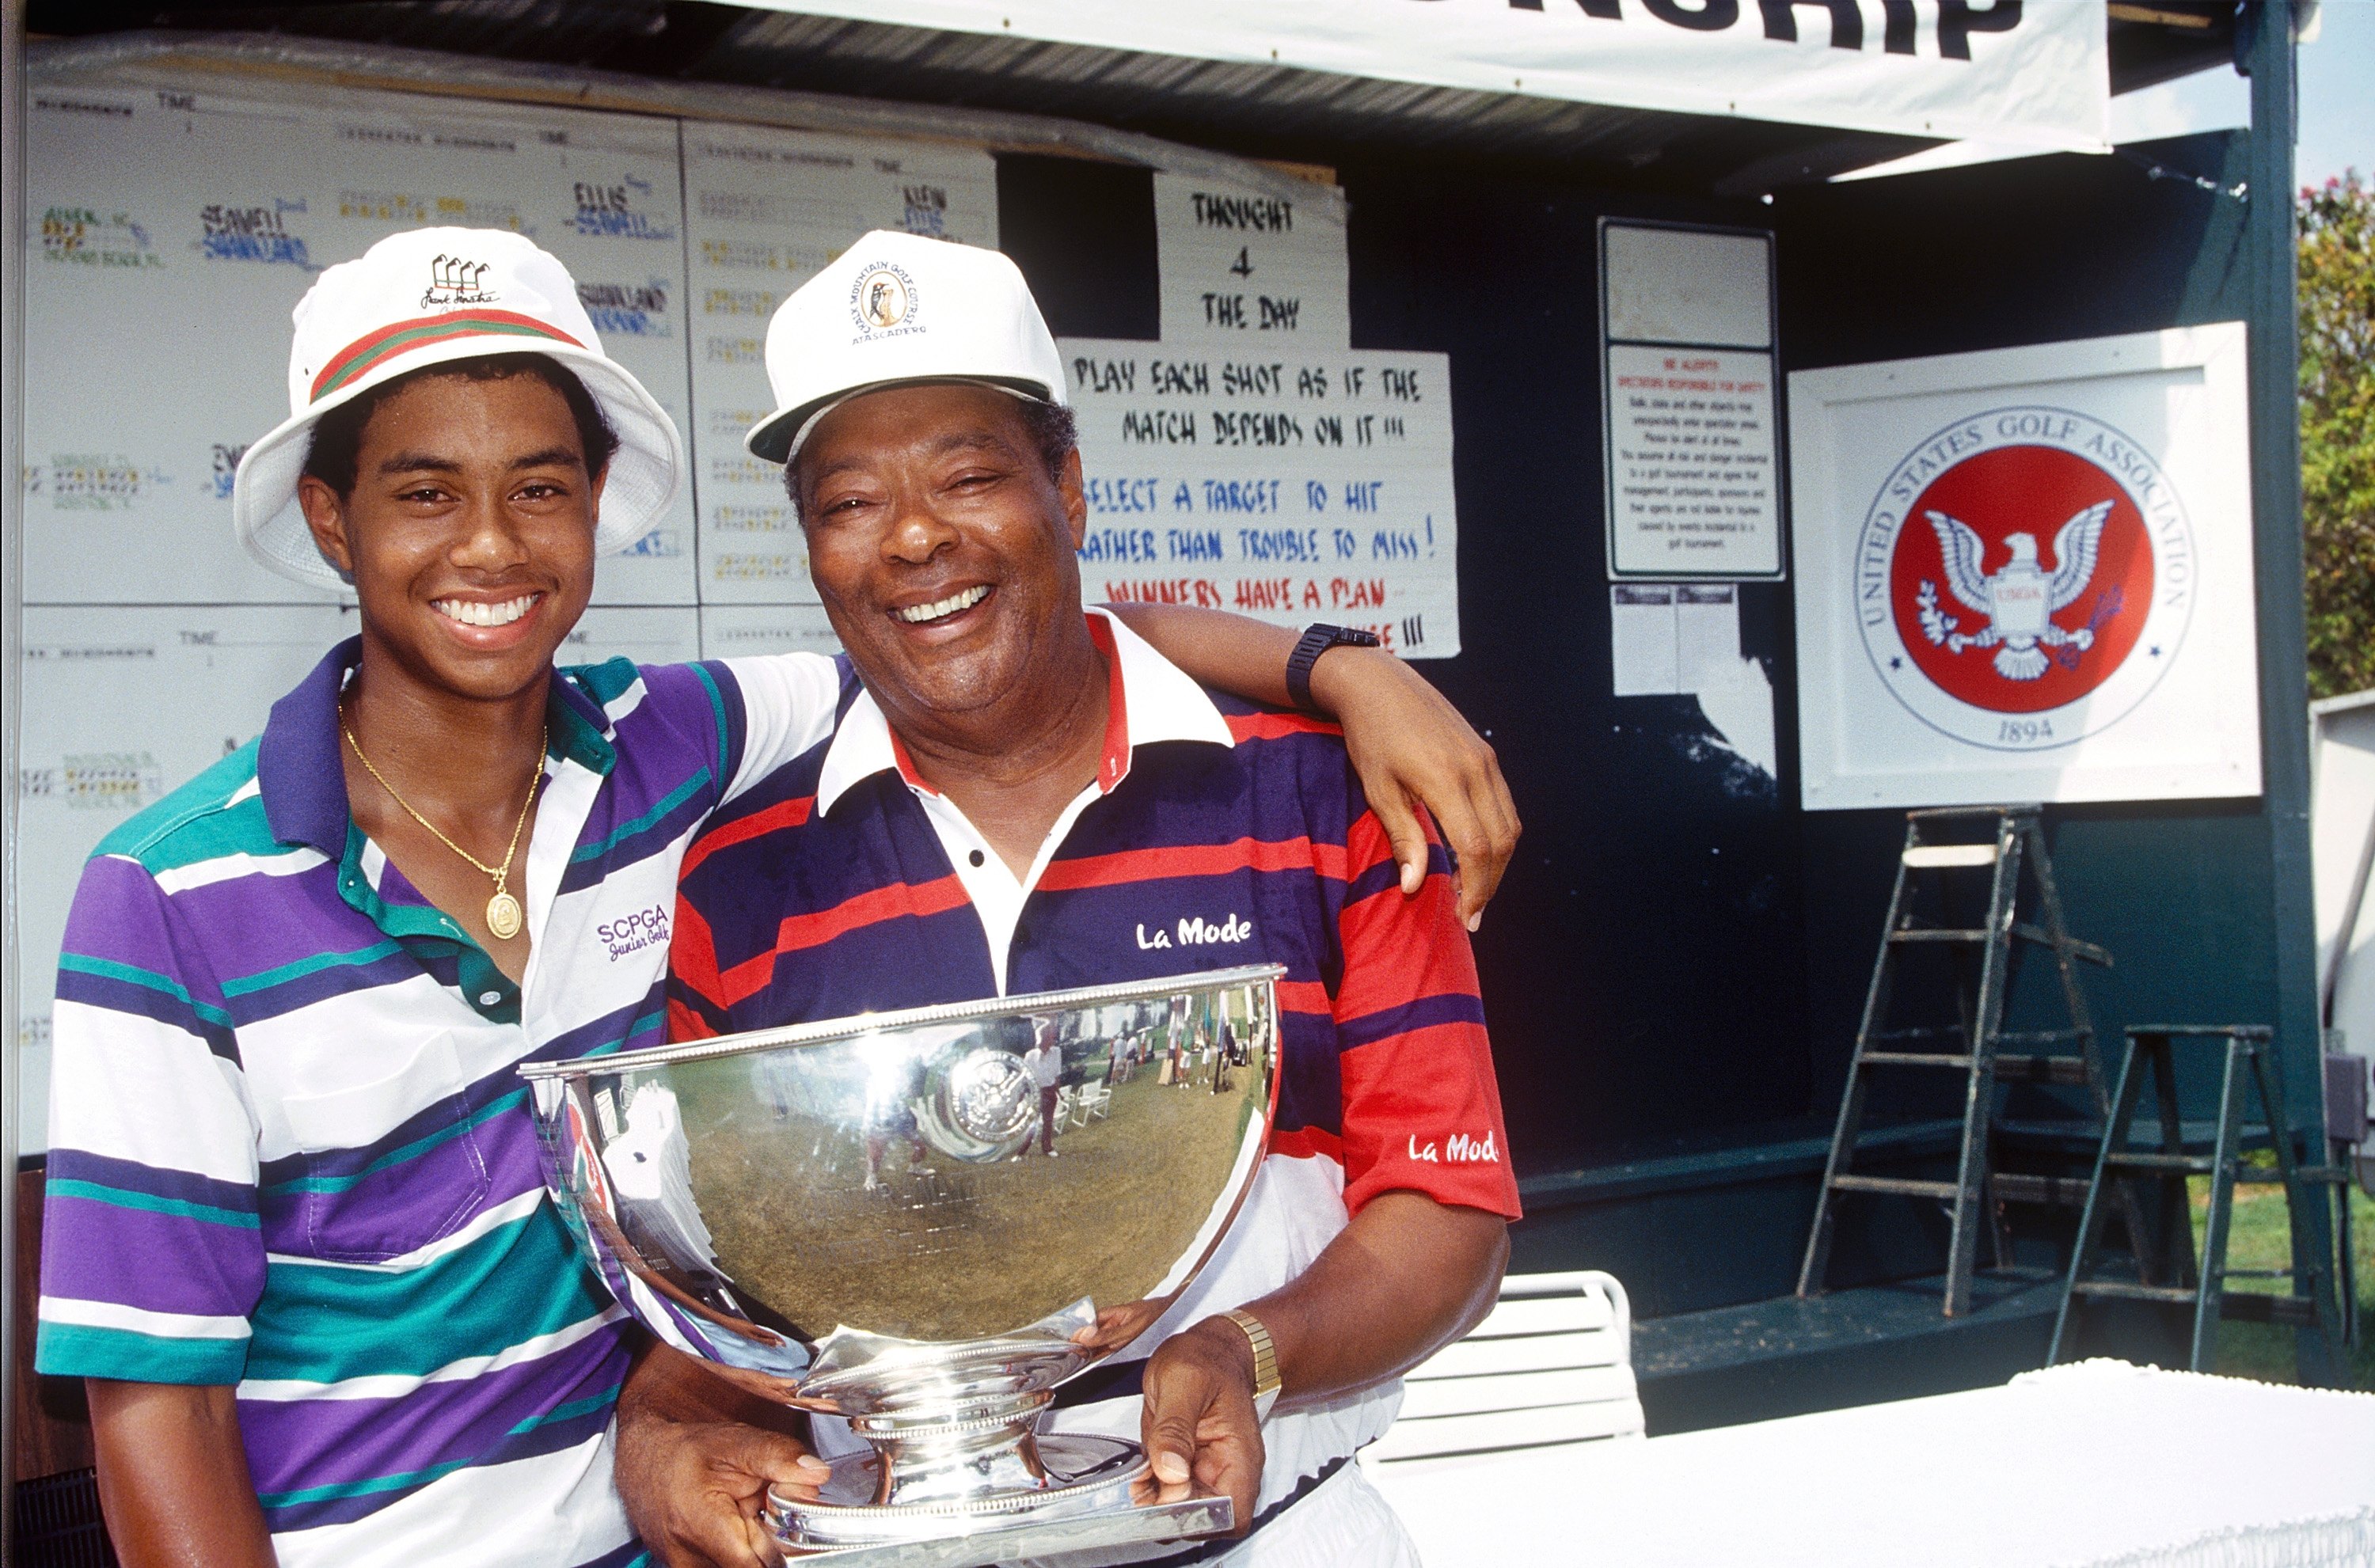 Tiger Woods and his father, Earl, celebrate Tiger's victory at the 1991 USGA Junior Amateur Championships in Orlando, Florida on July 28, 1991. | Source: Getty Images